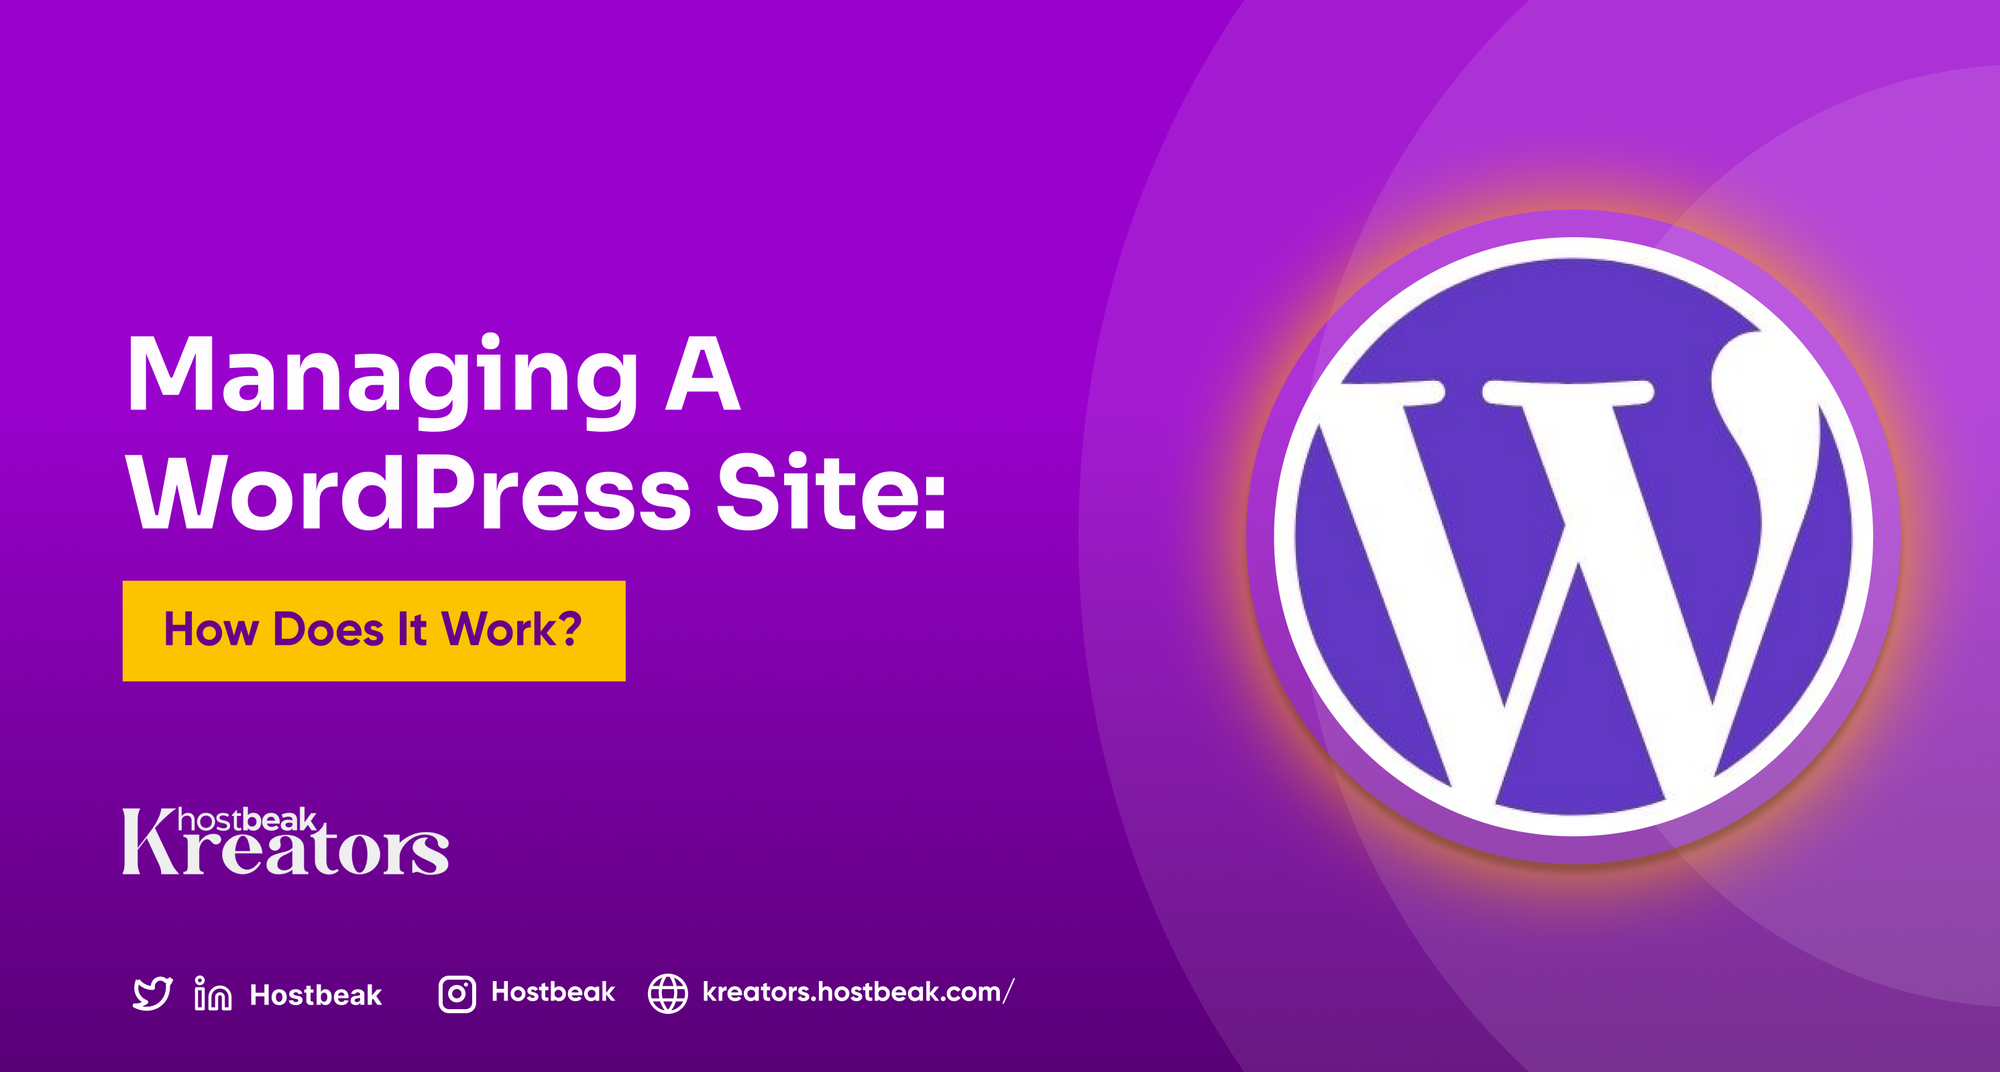 Managing a WordPress site: How does it work?